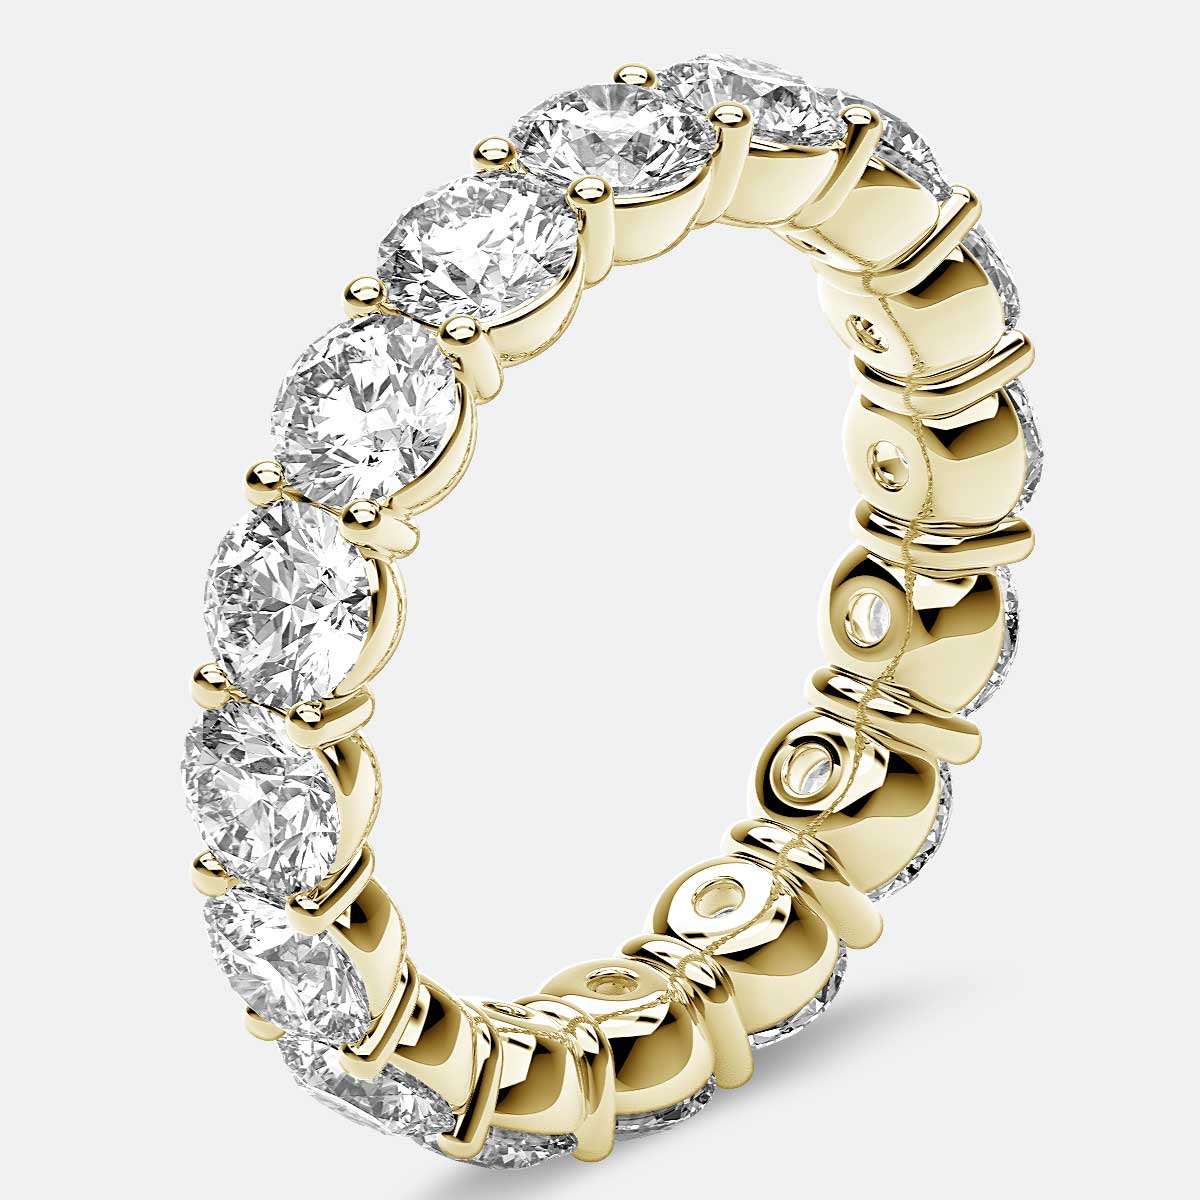 Classic Prong Set Eternity Ring with Round Diamonds in 18k Yellow Gold